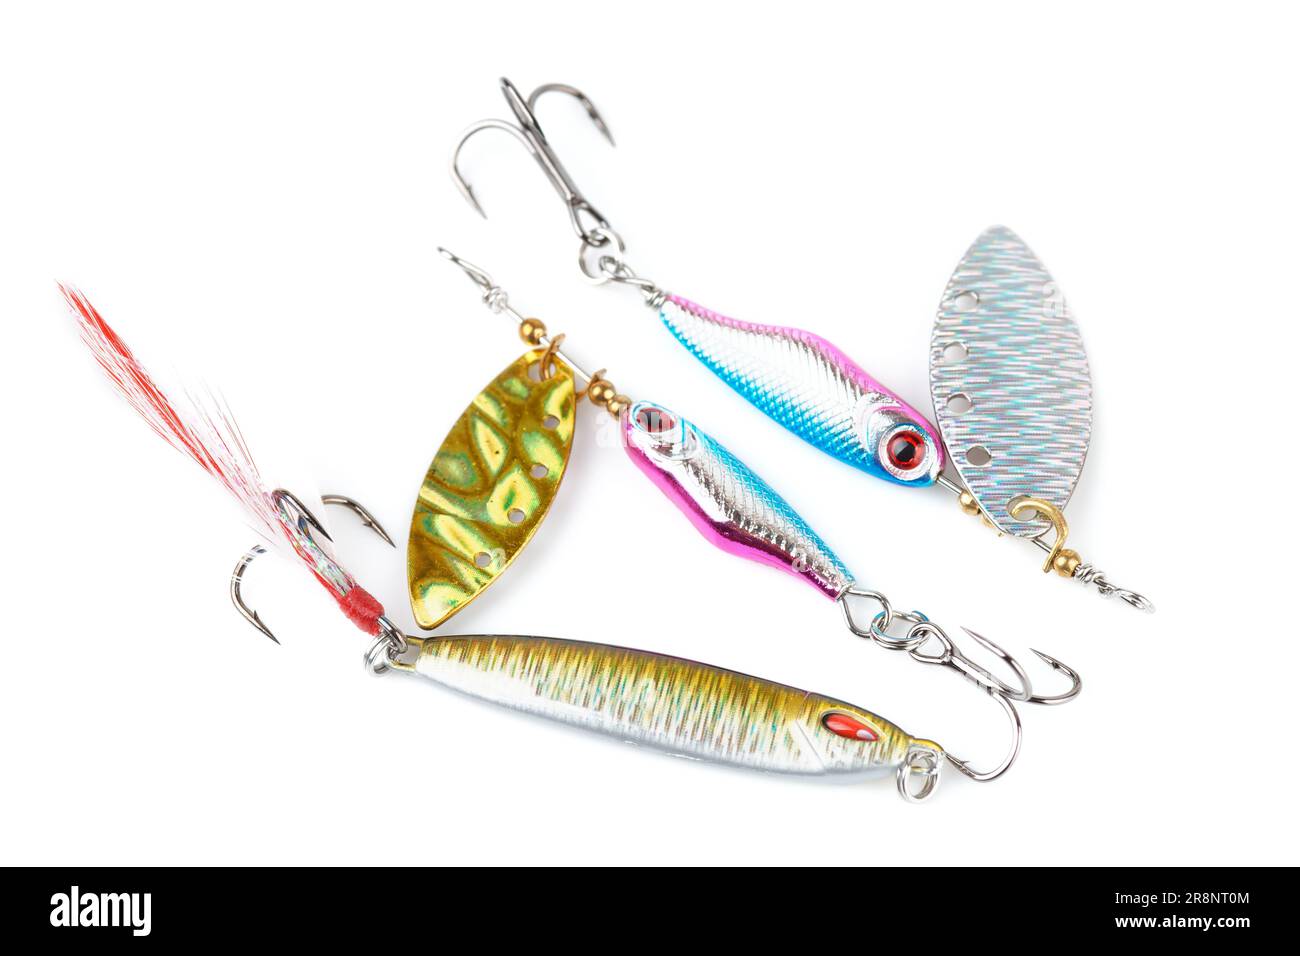 https://c8.alamy.com/comp/2R8NT0M/set-of-metal-lures-for-fishing-shot-on-white-surface-2R8NT0M.jpg